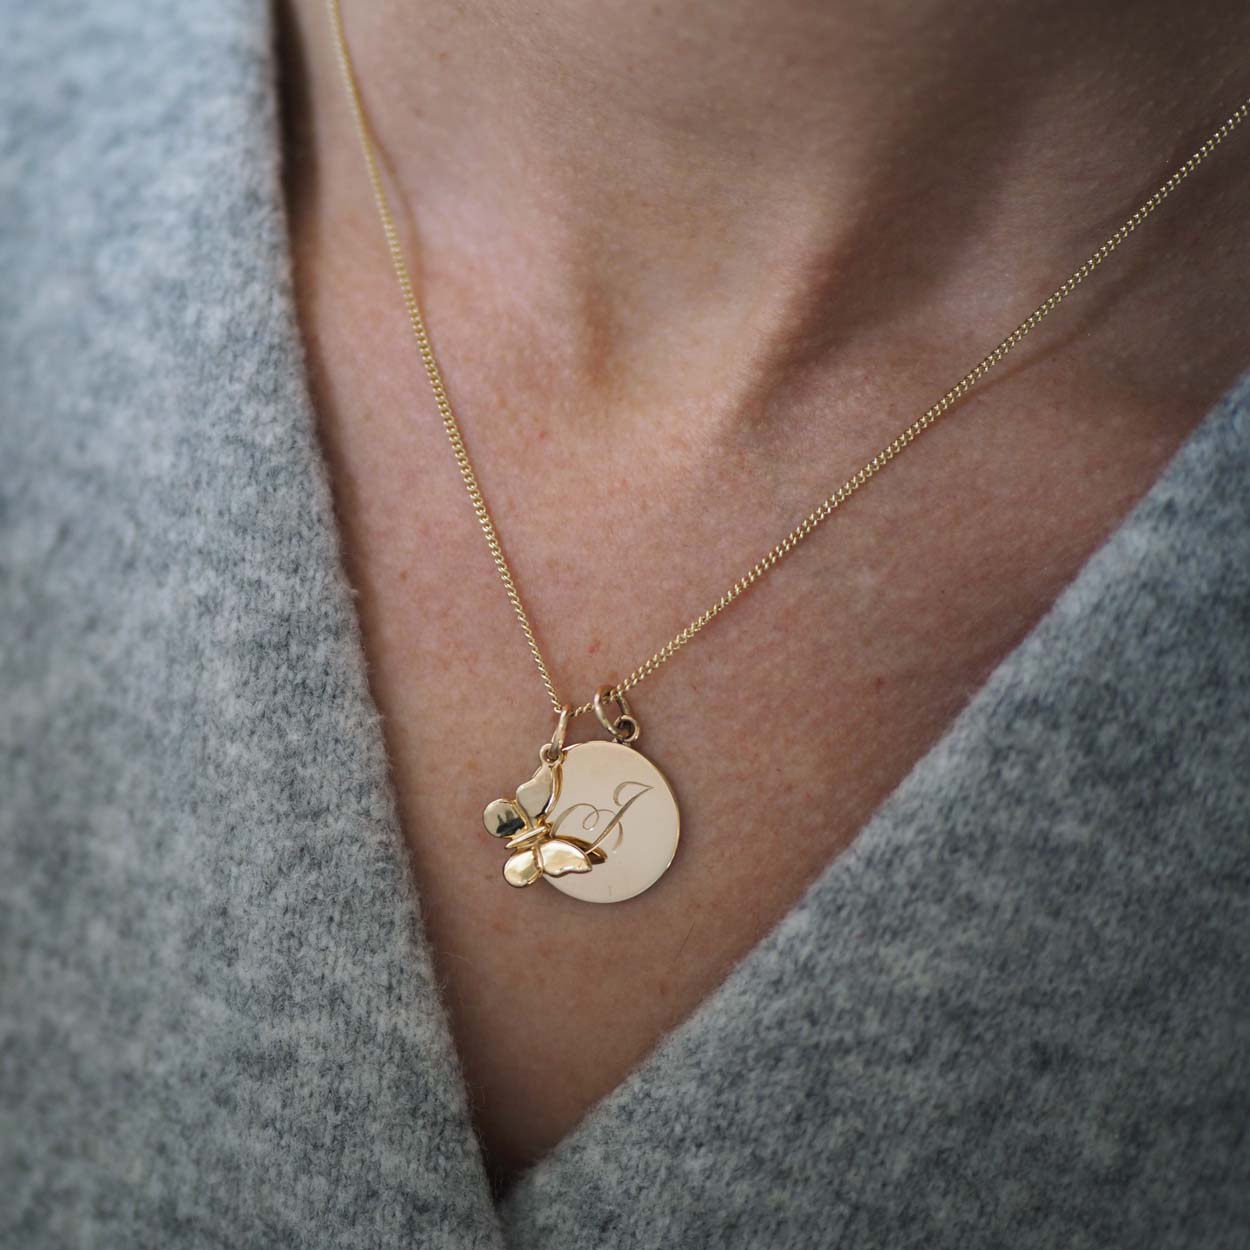 Bianca Jones handmade solid 9ct gold butterfly charm featuring intricate detailing is seen on a chain with a hand-engraved initial disc charm in rose, white, or yellow gold.